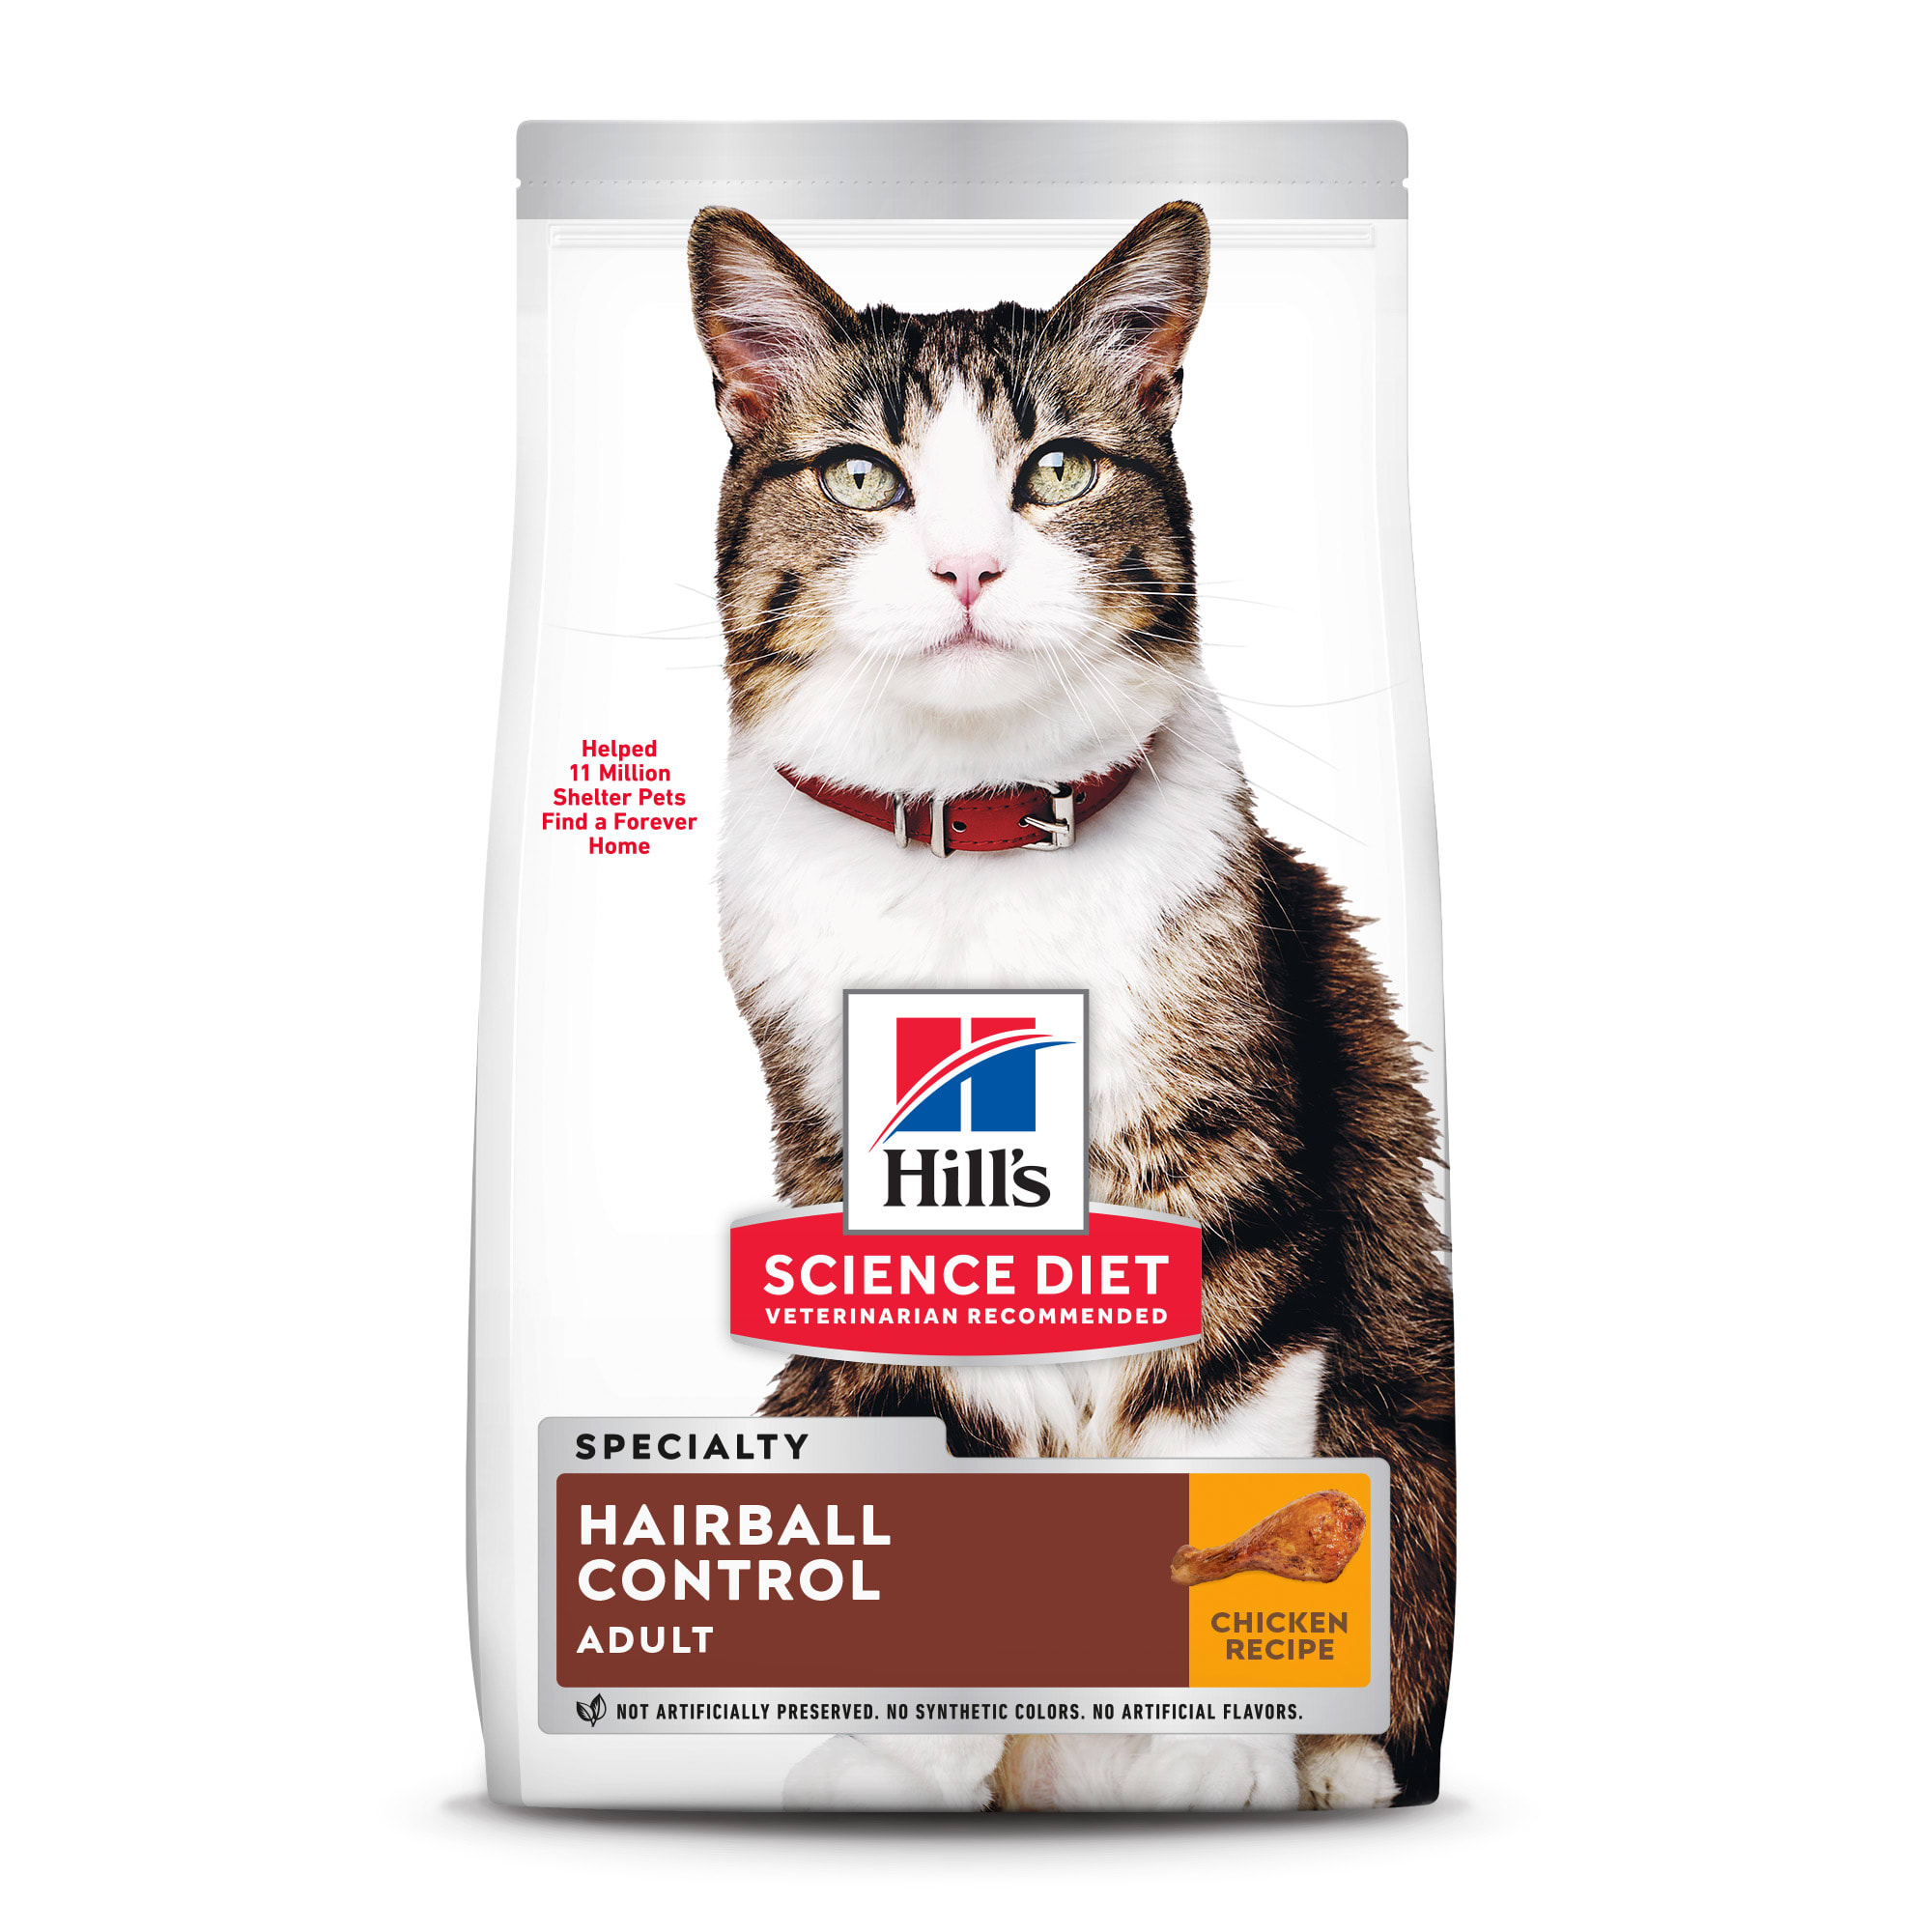 Hairball Control Hills Science Diet Dry Cat Food Chicken Recipe Adult 